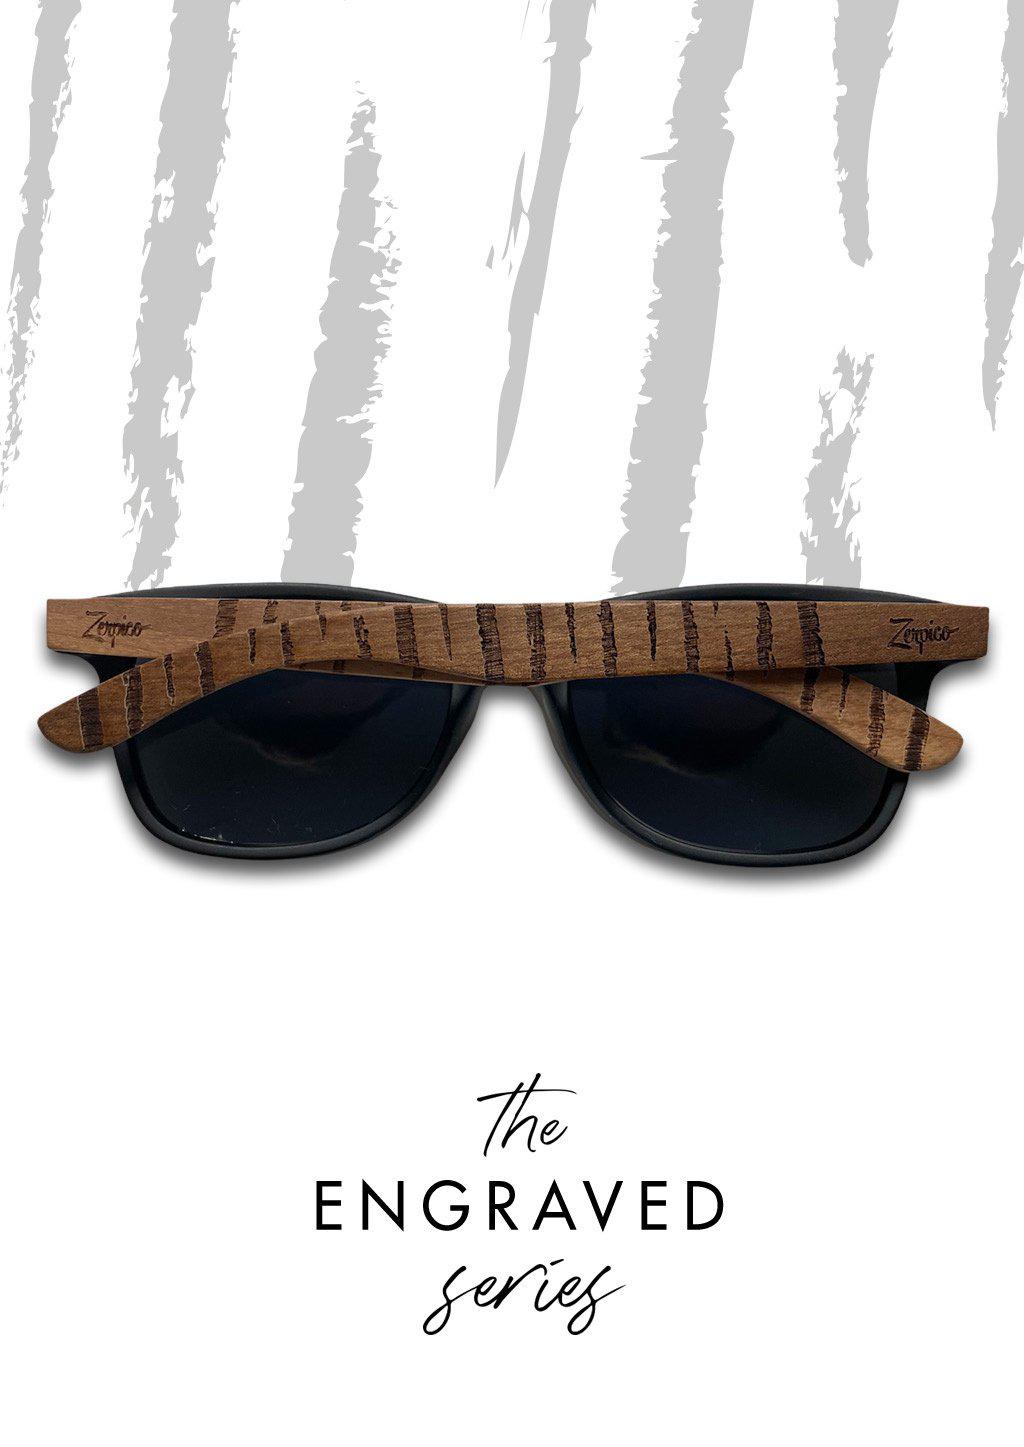 Engraved wooden sunglasses inspired by the untamed tigers and lions.